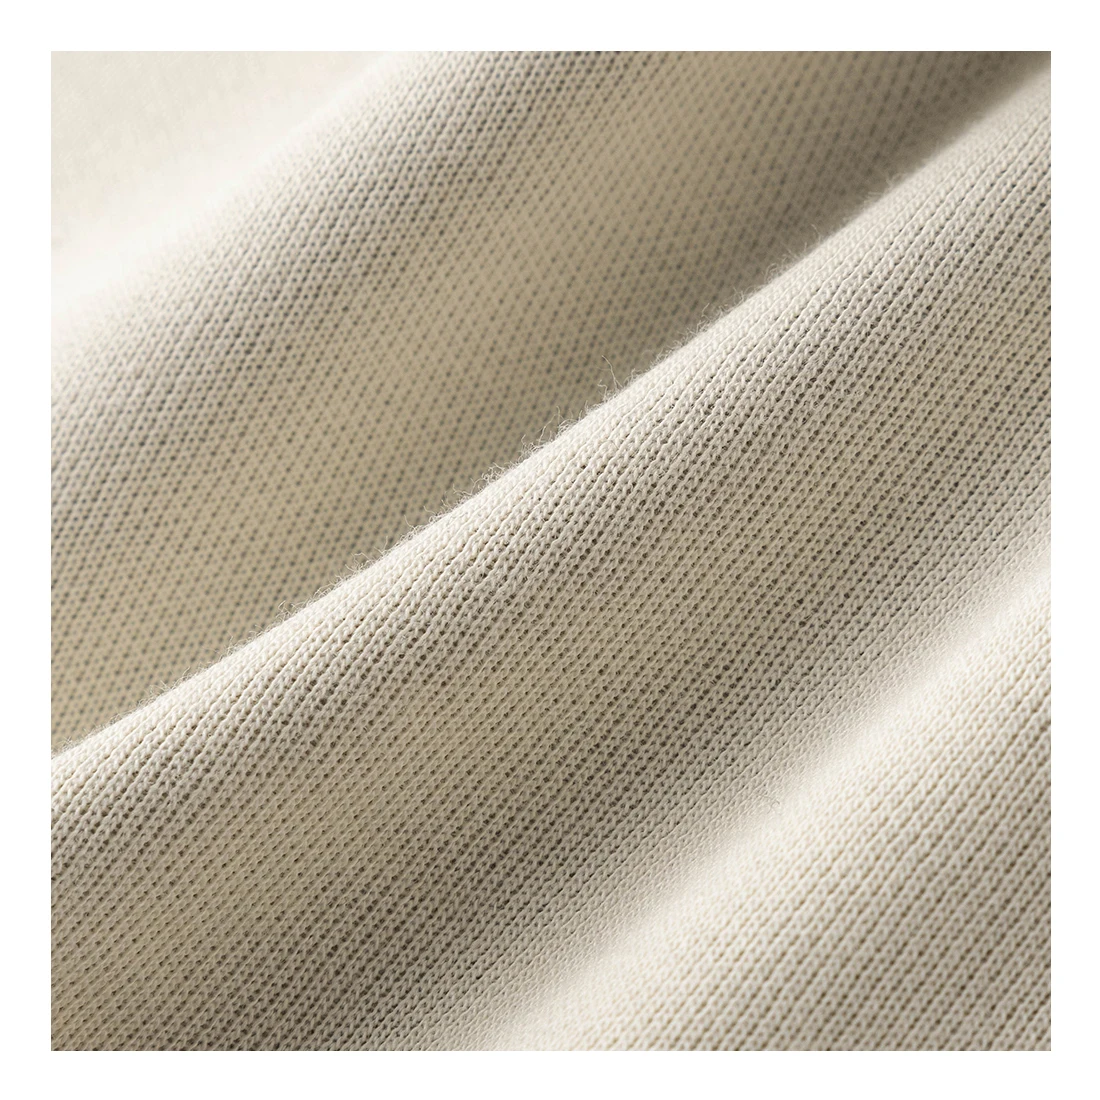 

EMF shielding Radiation Protection Faraday 53% Cotton 42% Silver 5% Polyester Knitted Conductive Fabric For Clothing